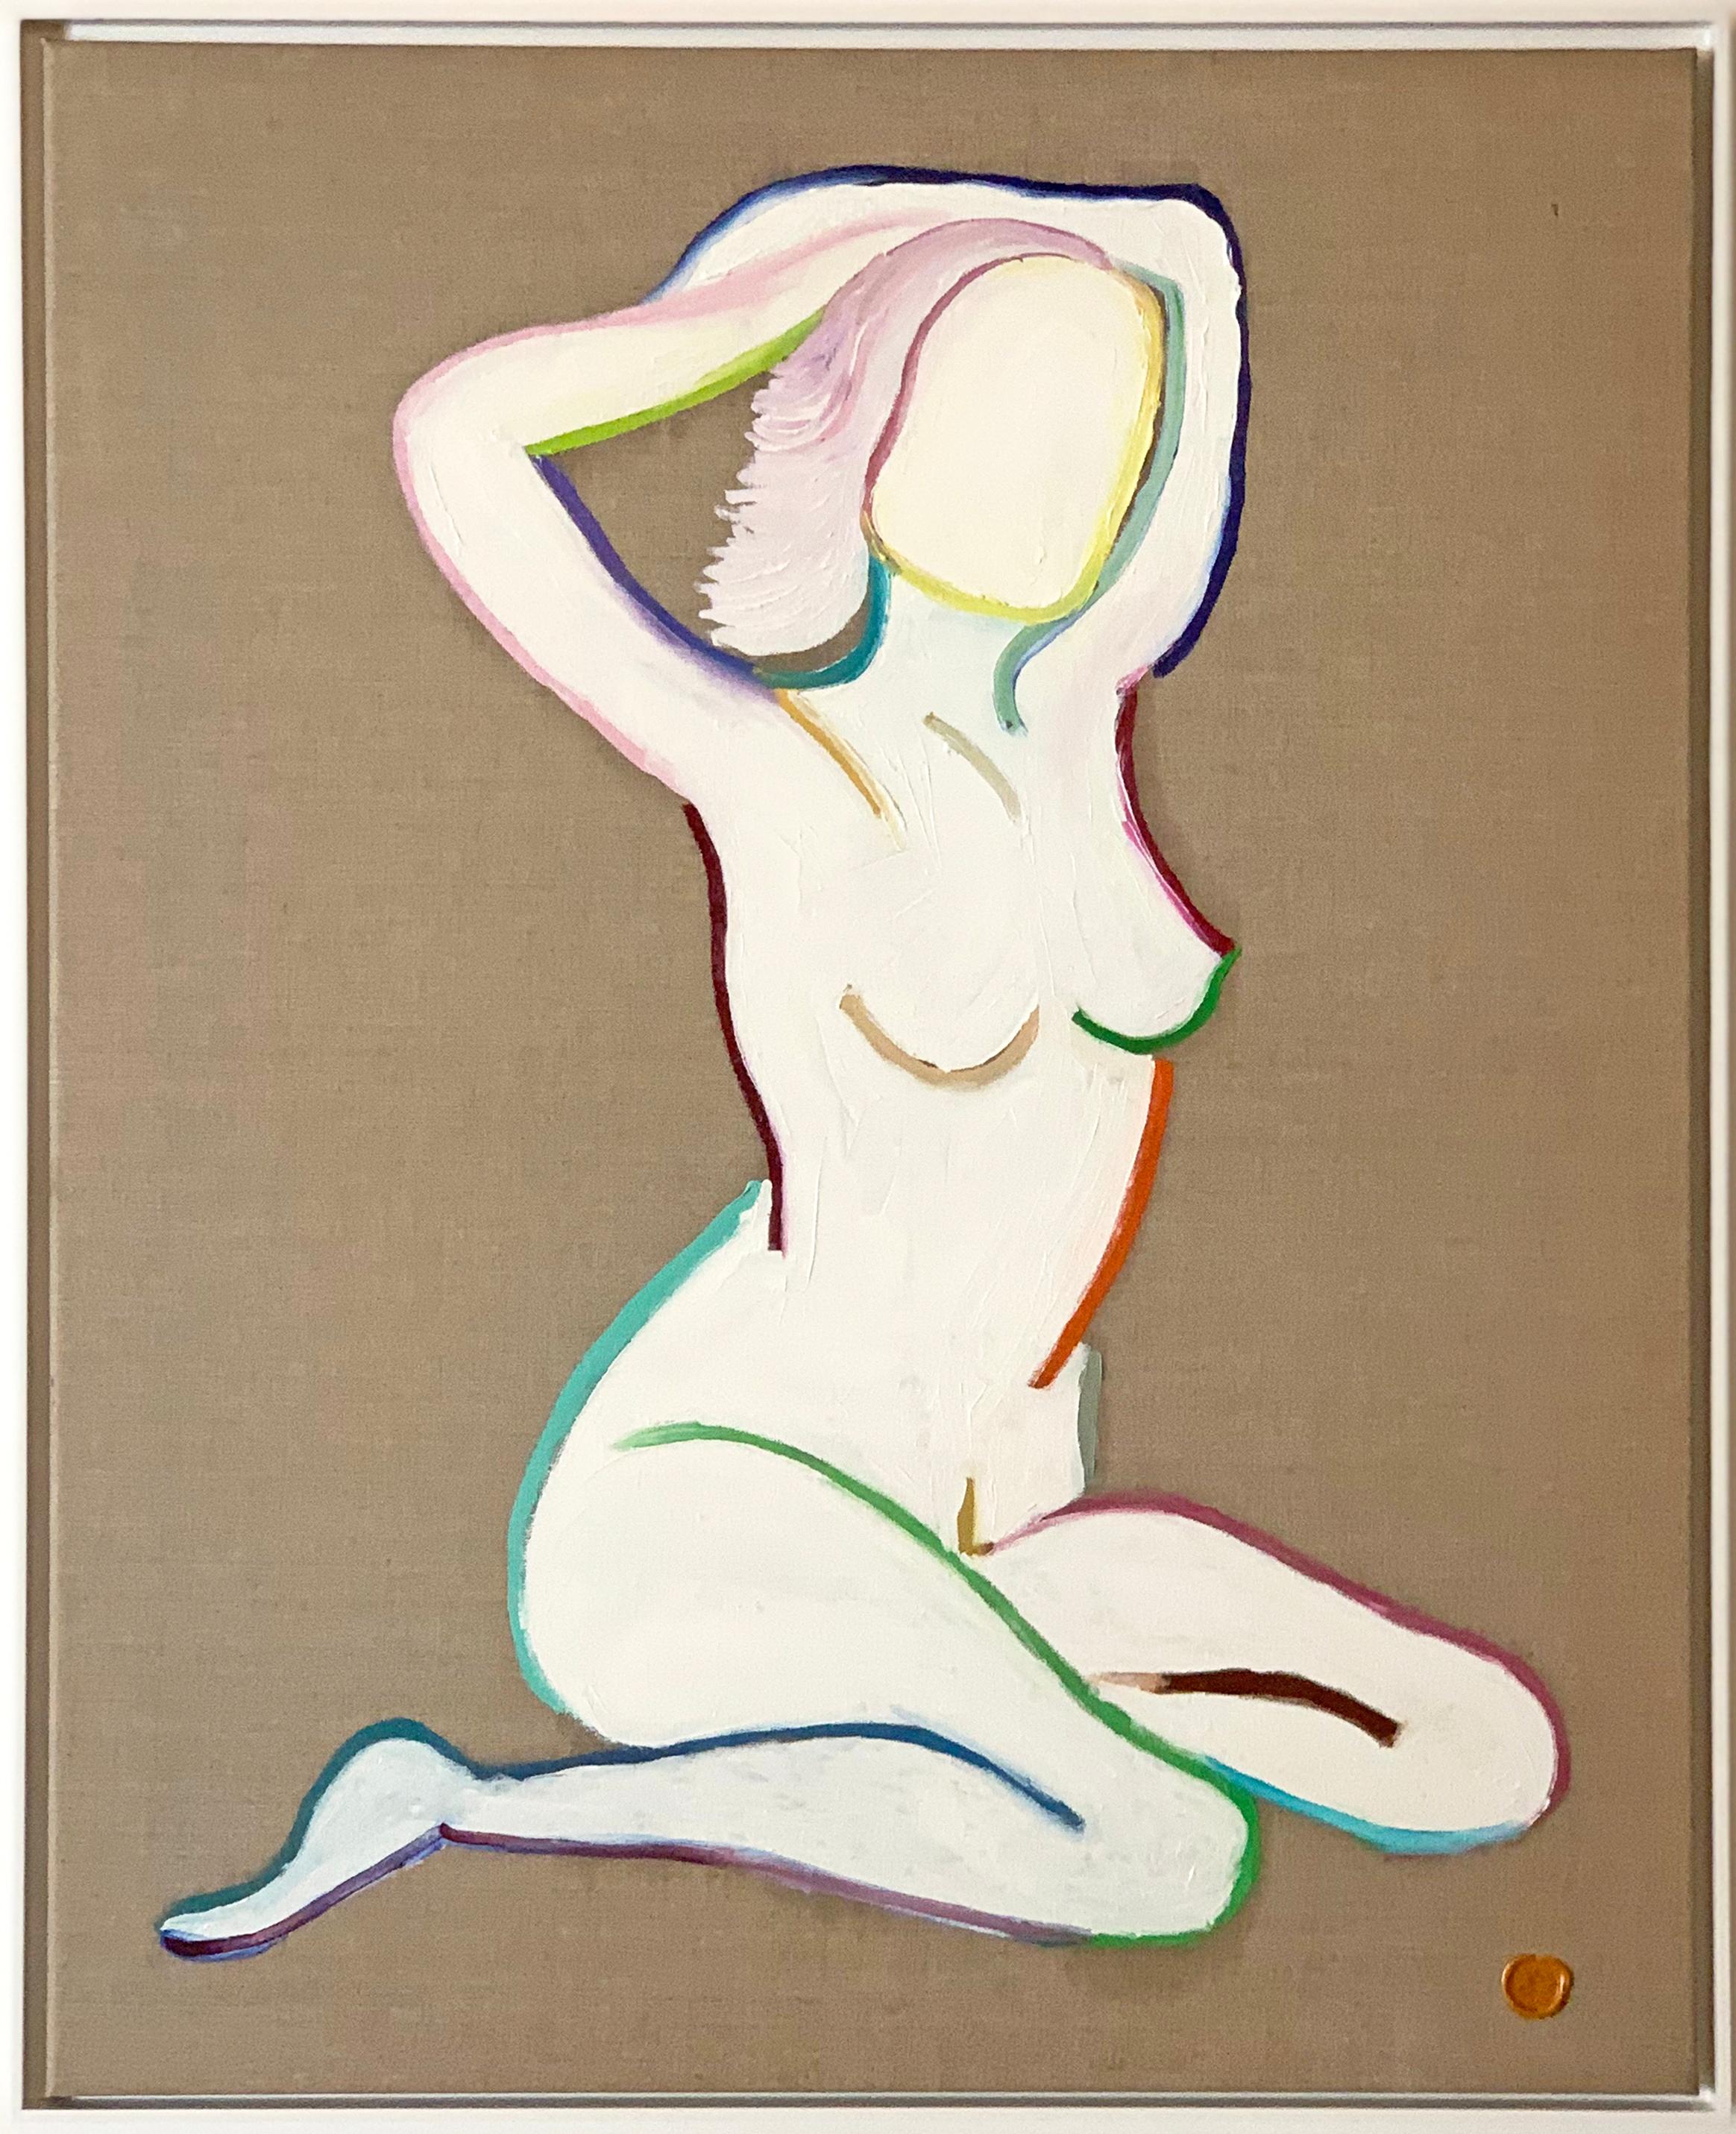 Katharina Hormel Abstract Painting - Posing for Matisse by K. Hormel - Nude Contemporary abstract Oil painting